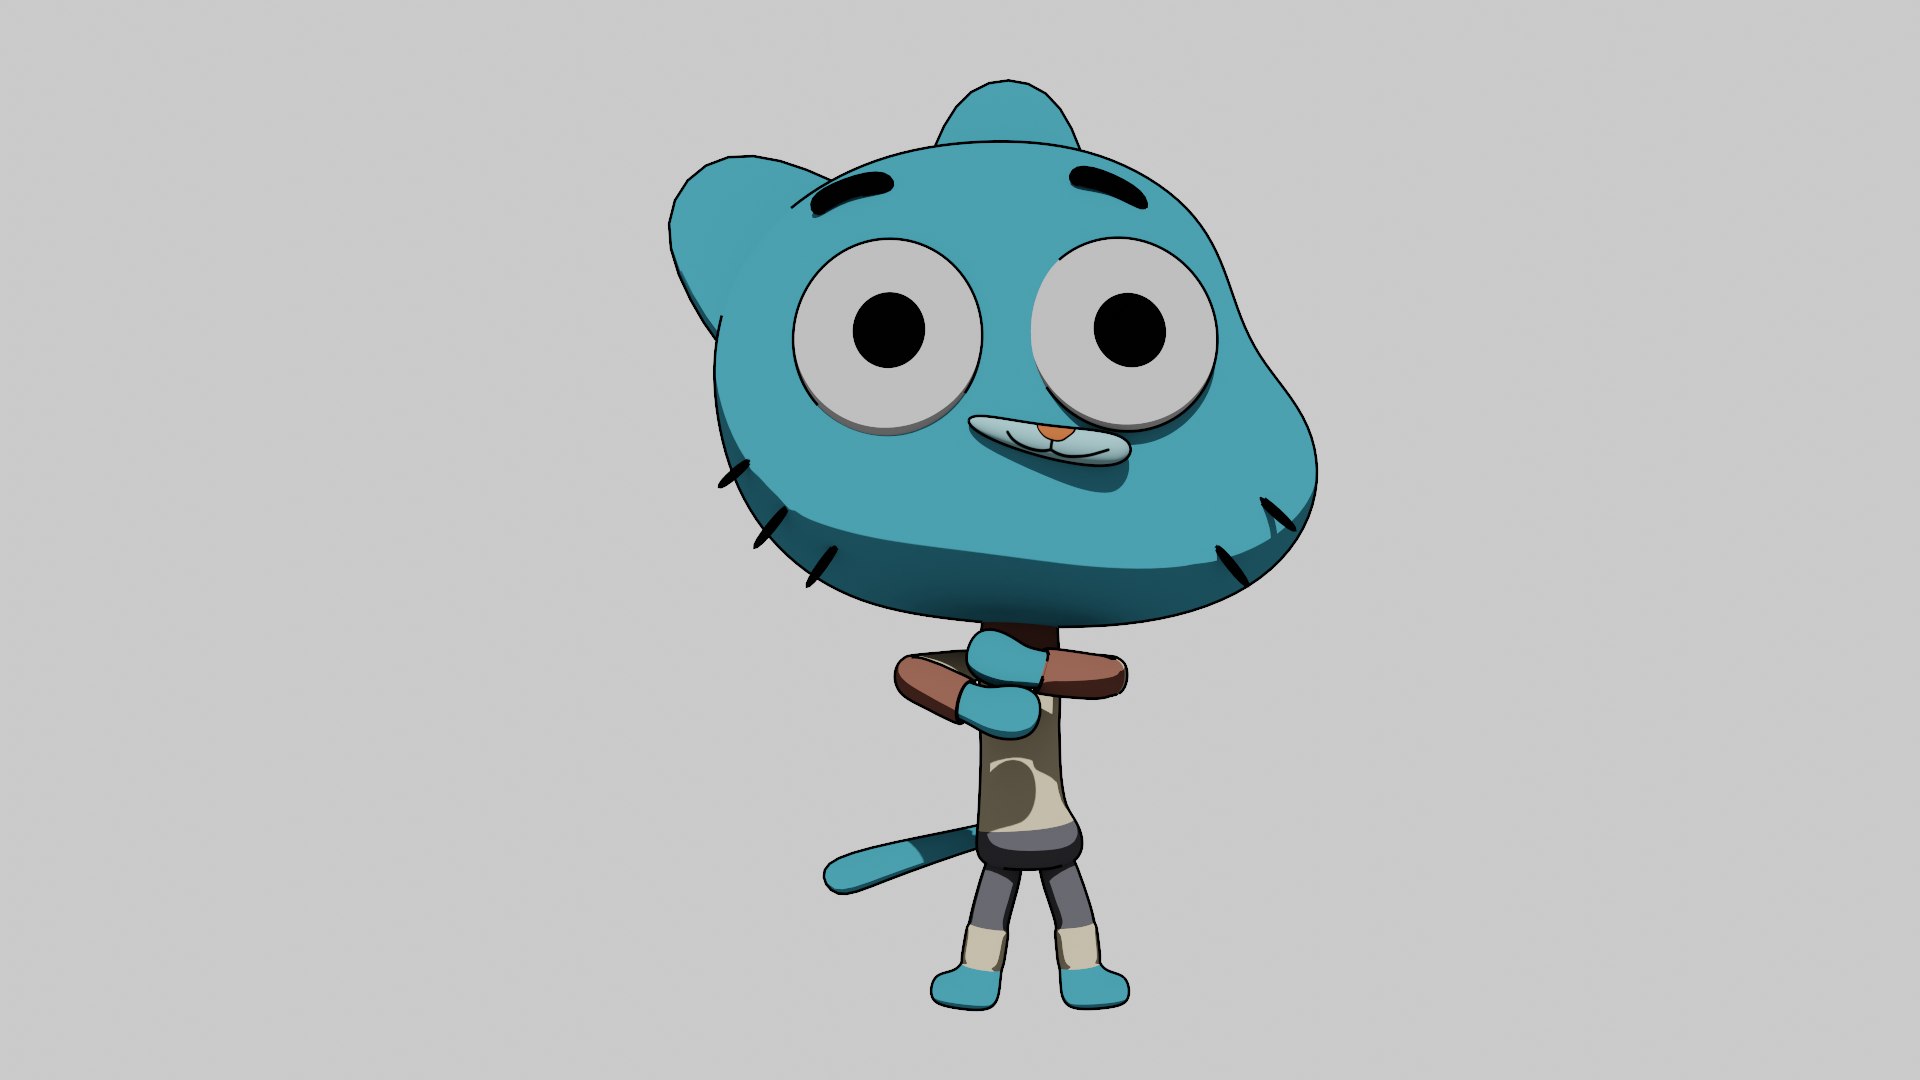 Create A 3D Gumball from The Amazing World of Gumball